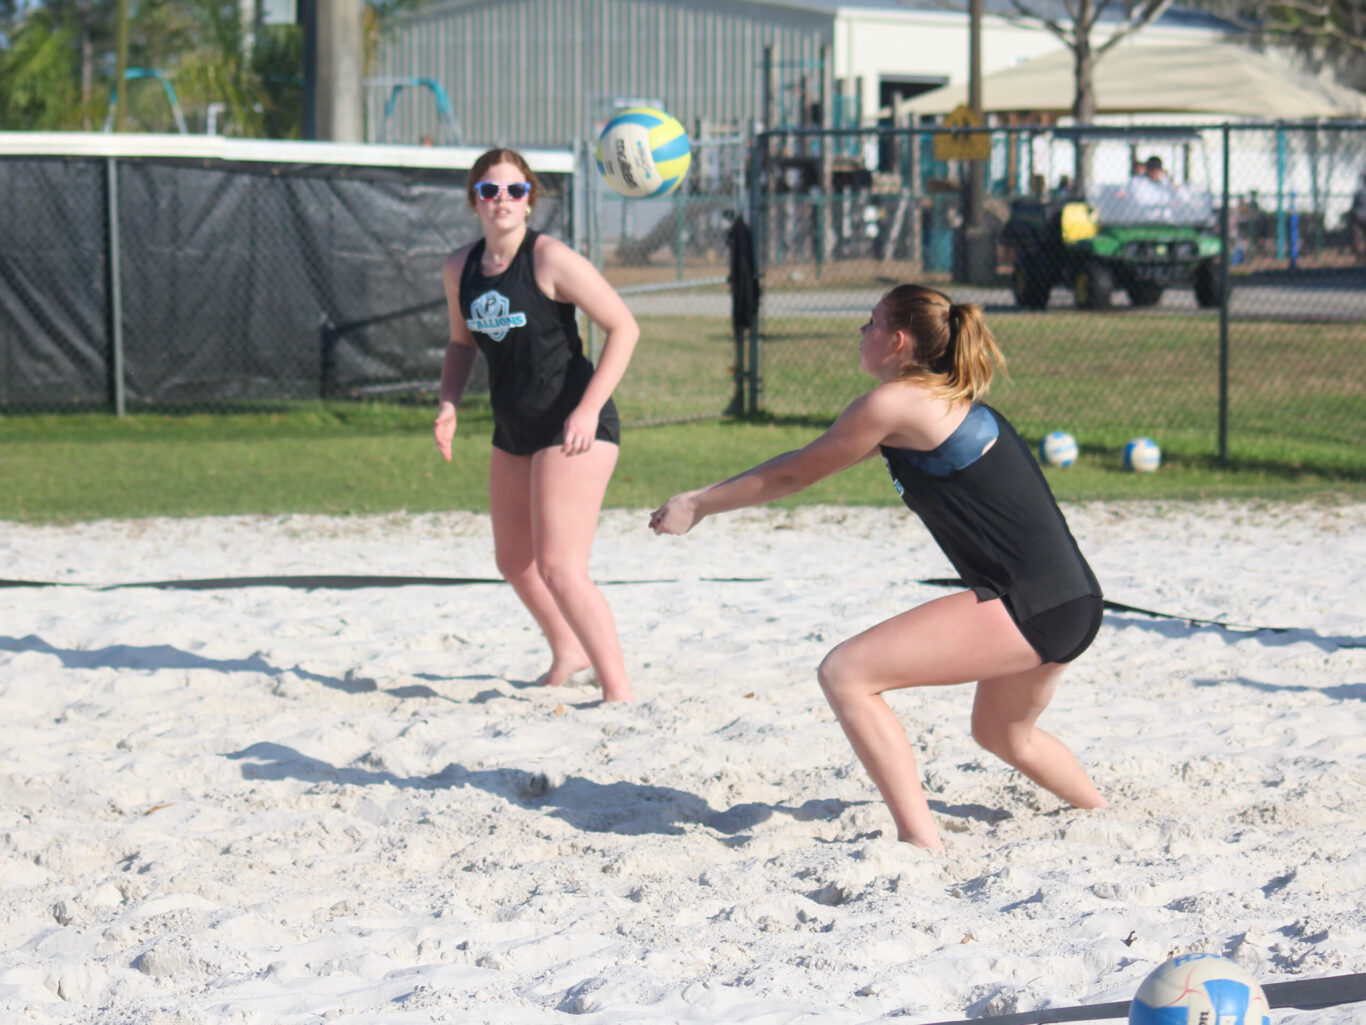 Two girls playing a game of beach volleyball.